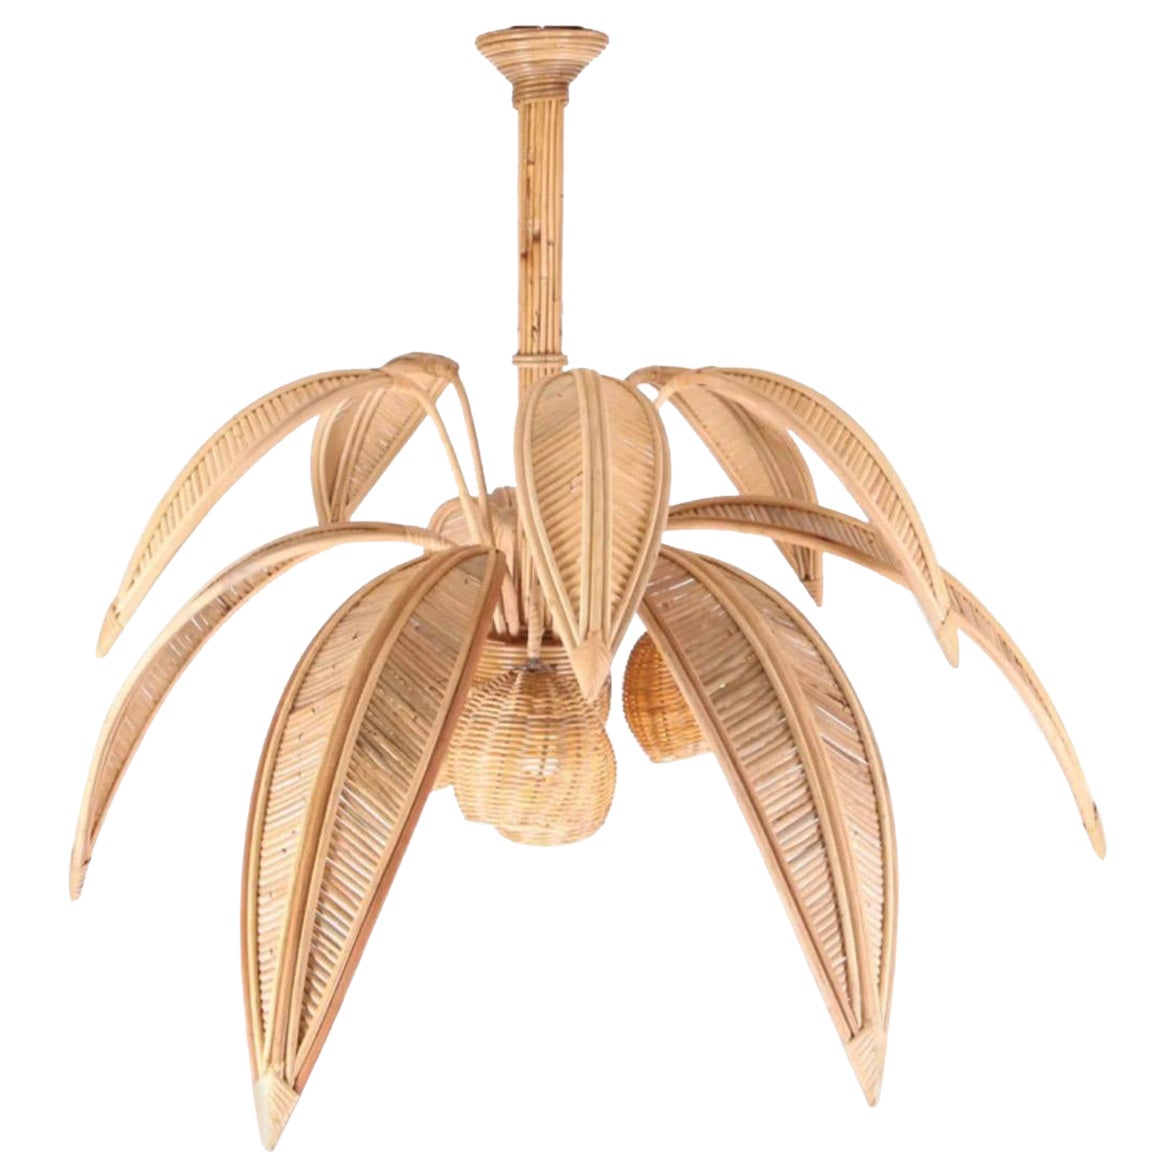 Rattan « coconut tree/palm tree » ceiling light For Sale